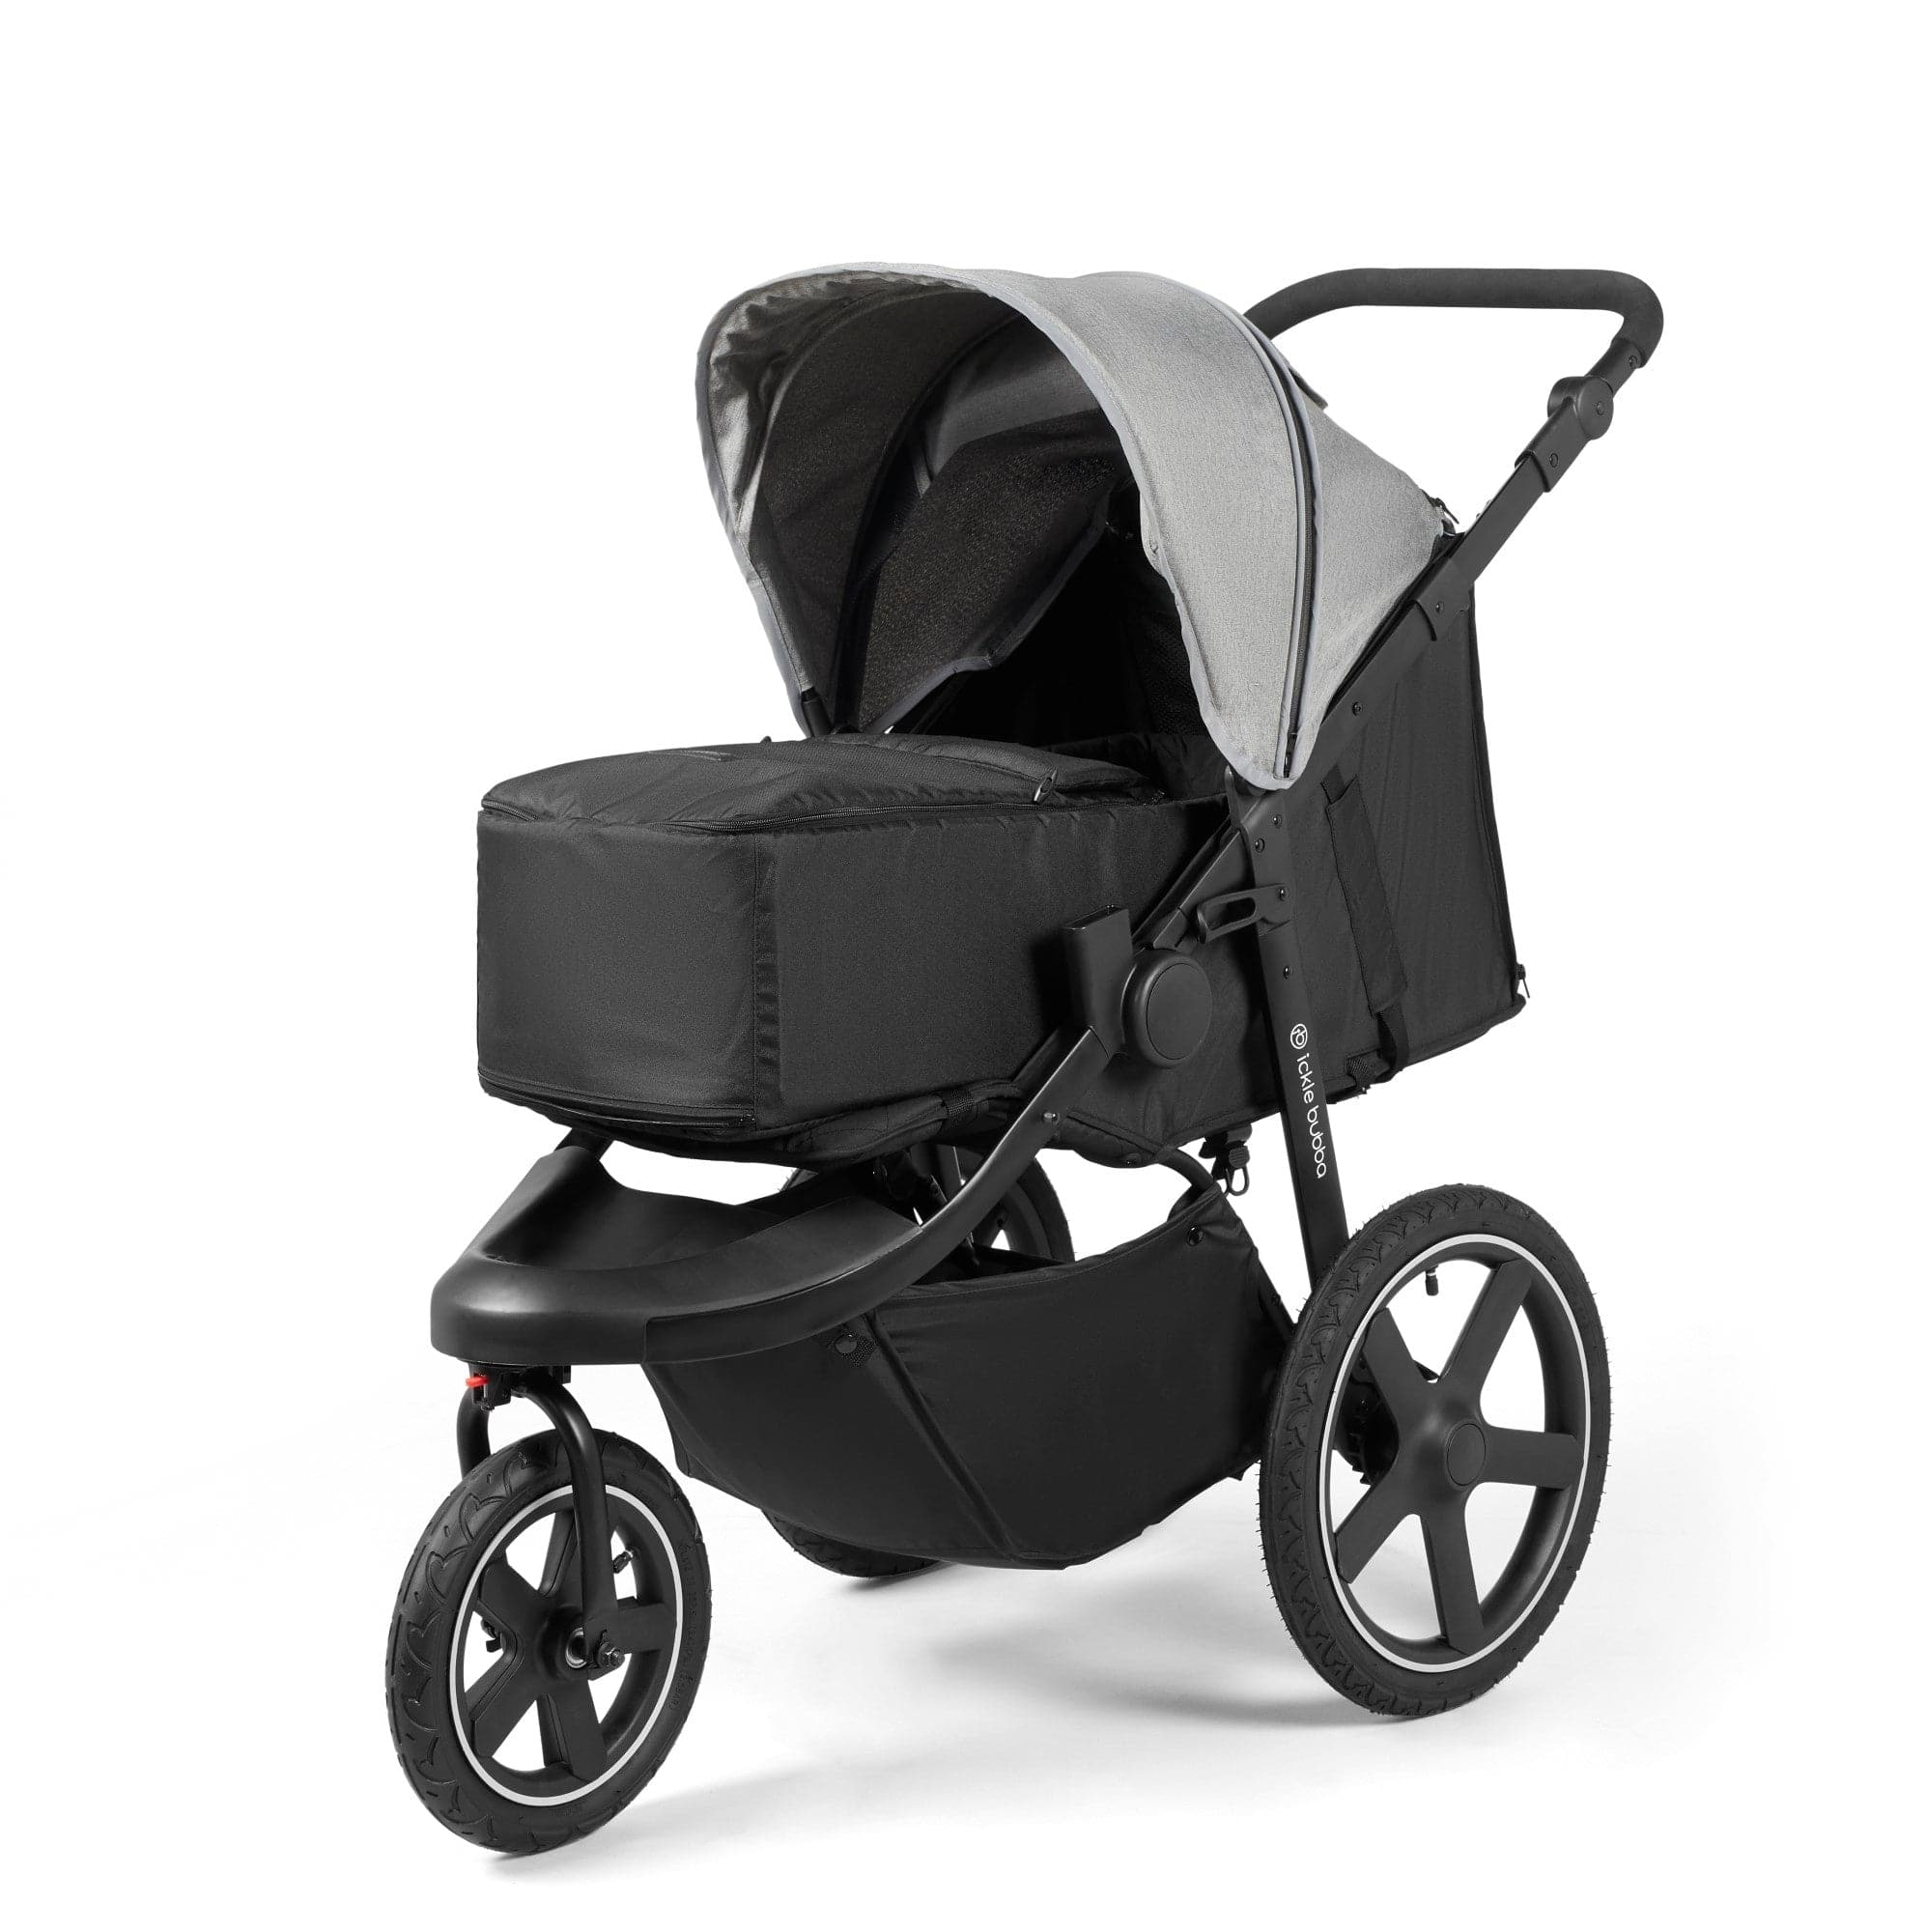 Ickle Bubba Venus Prime Jogger 3 Wheel Stroller I-Size Travel System with Isofix Base - Space Grey - For Your Little One